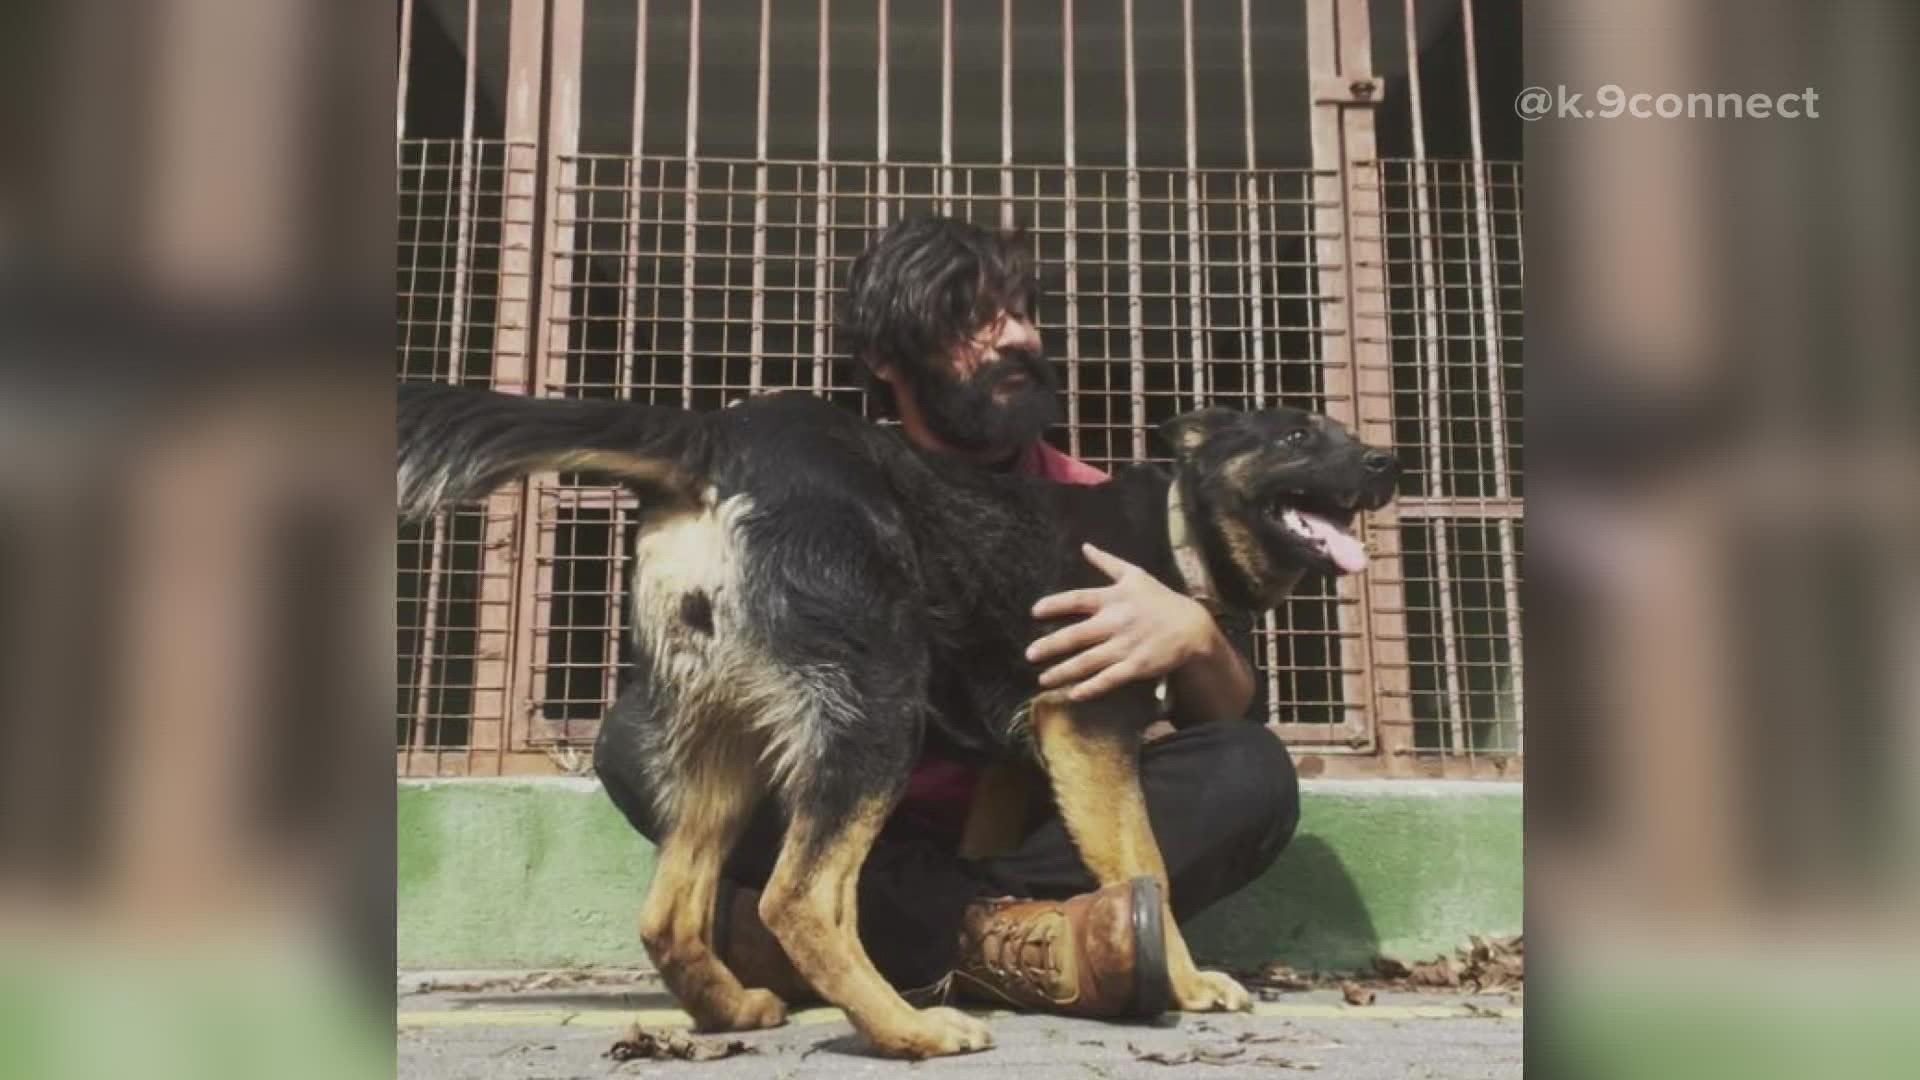 Tim Davis and Chris Jimenez connected through TikTok. The two are close to bringing dozens of trained German shepherds home after weeks in Ukraine and Poland.